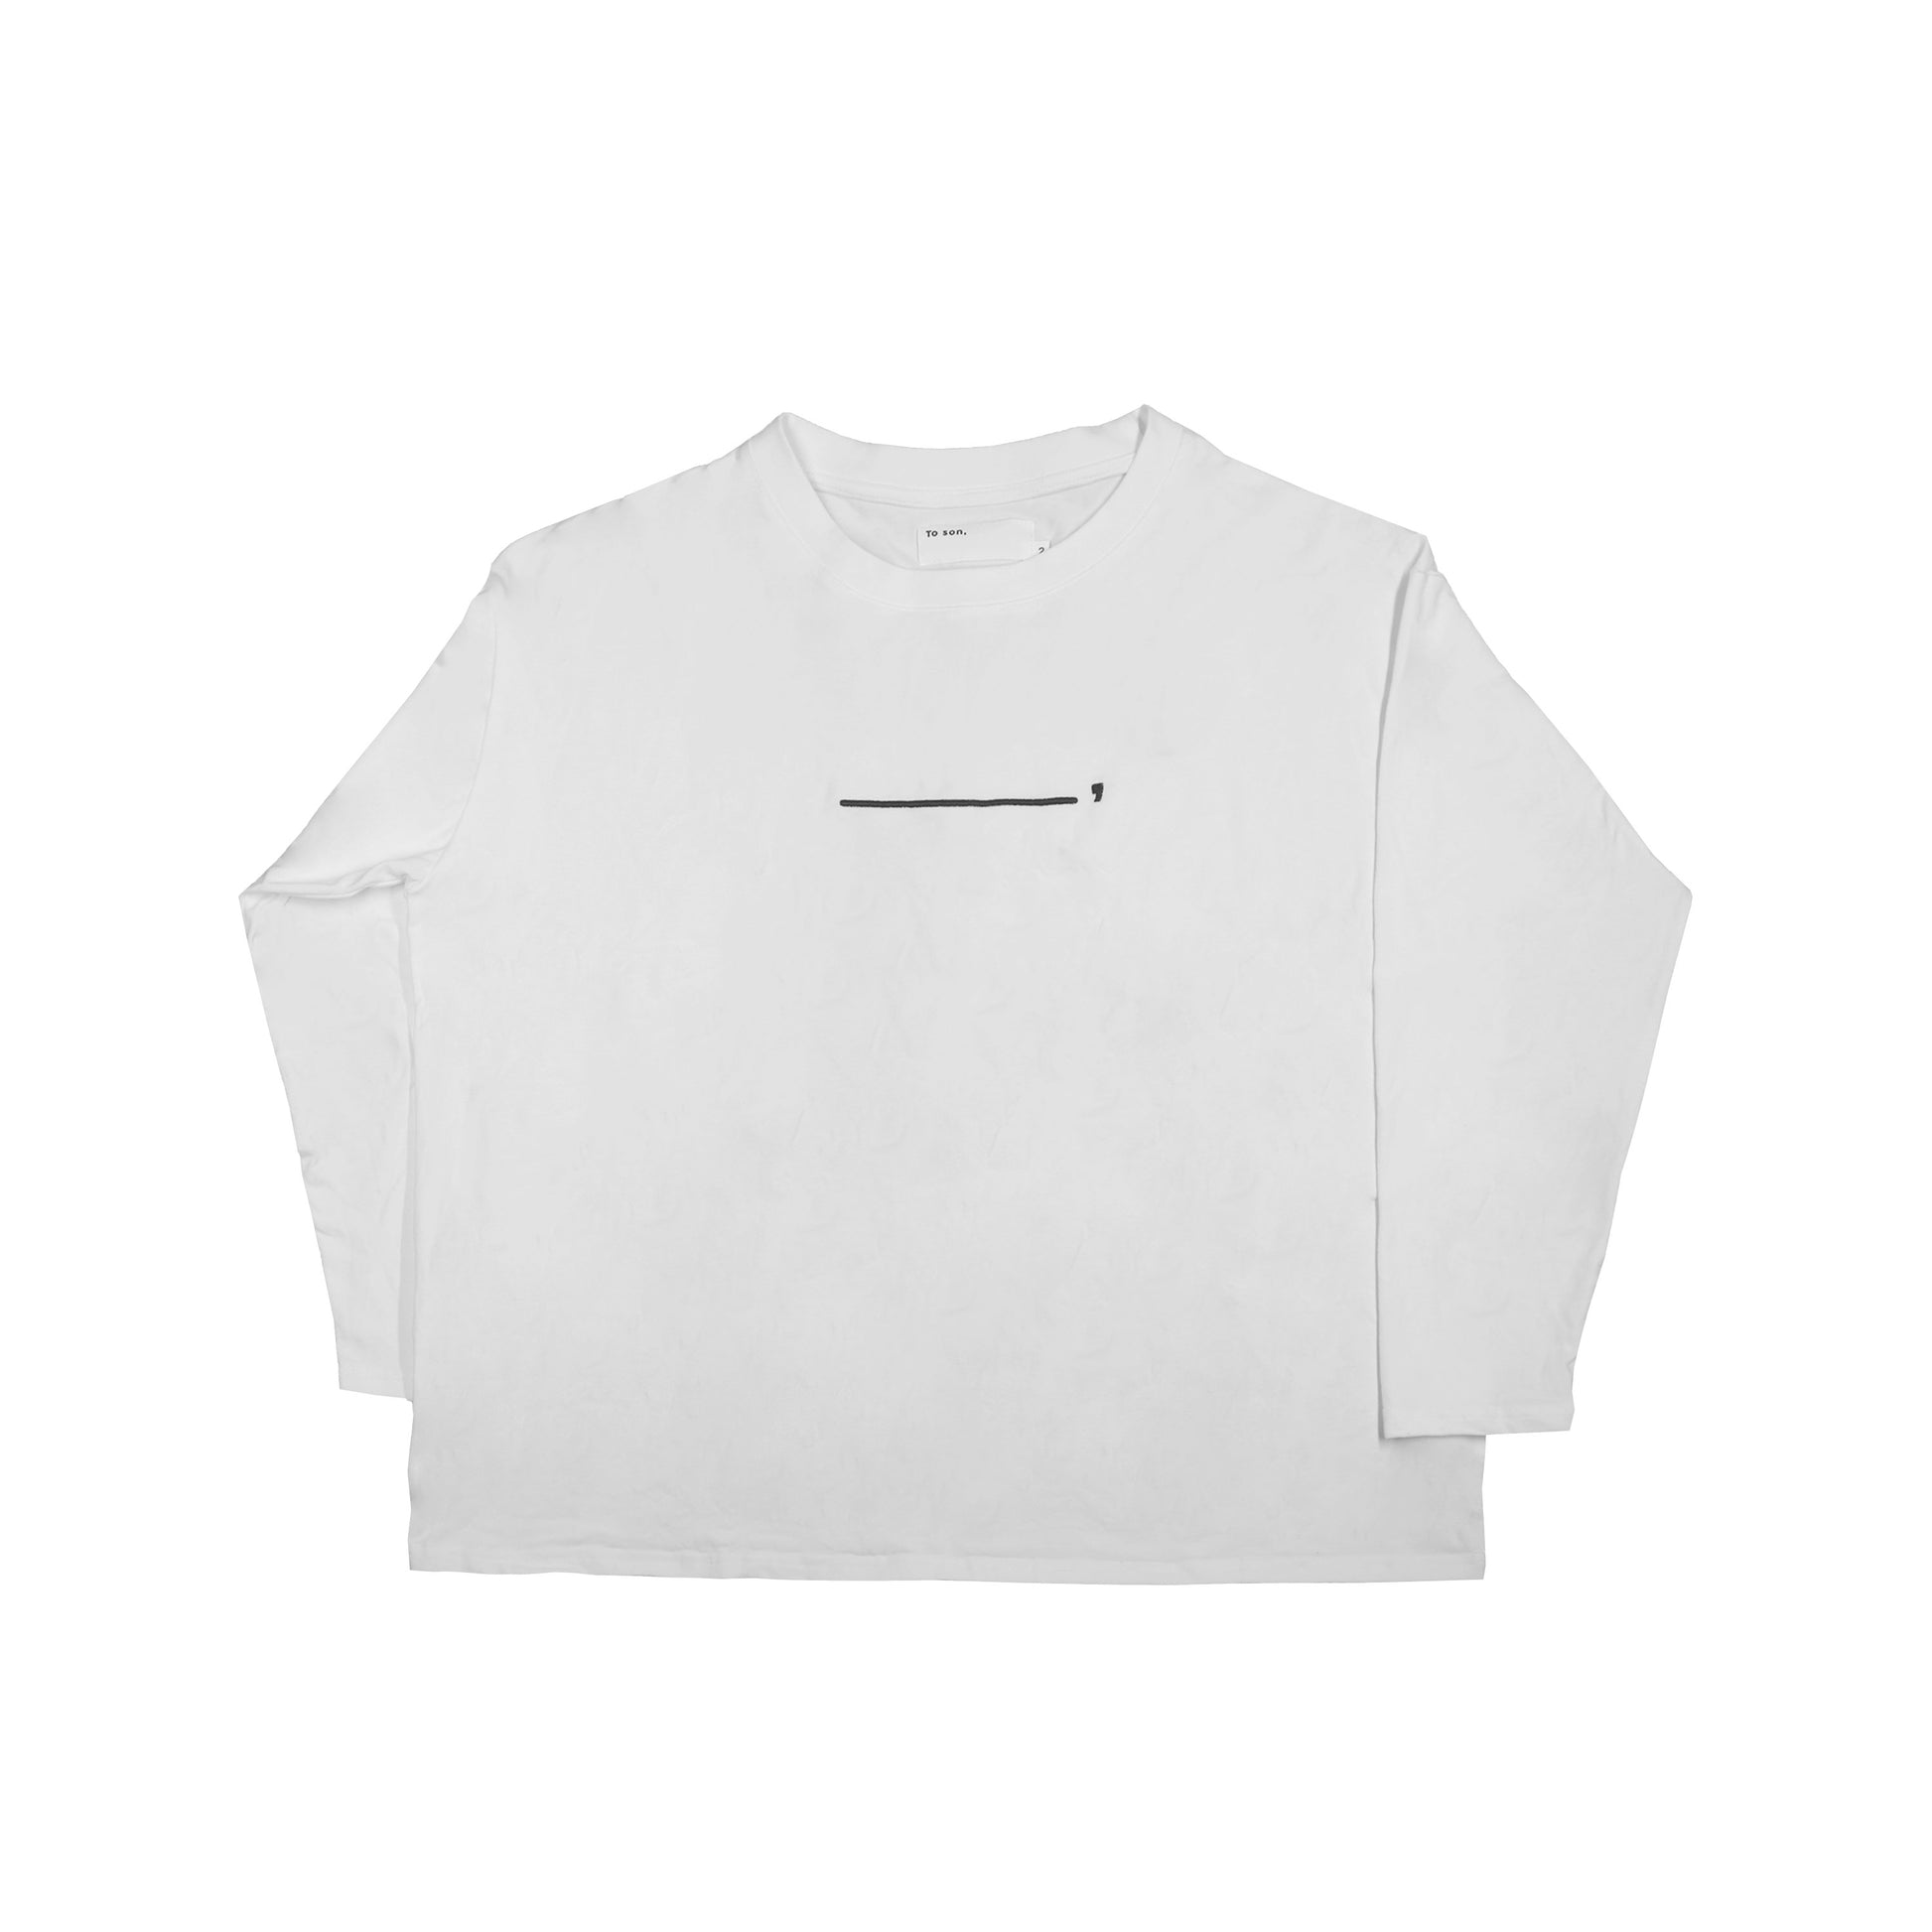 Toson, "Cloud" Patchwork Long Sleeve T-shirt - White